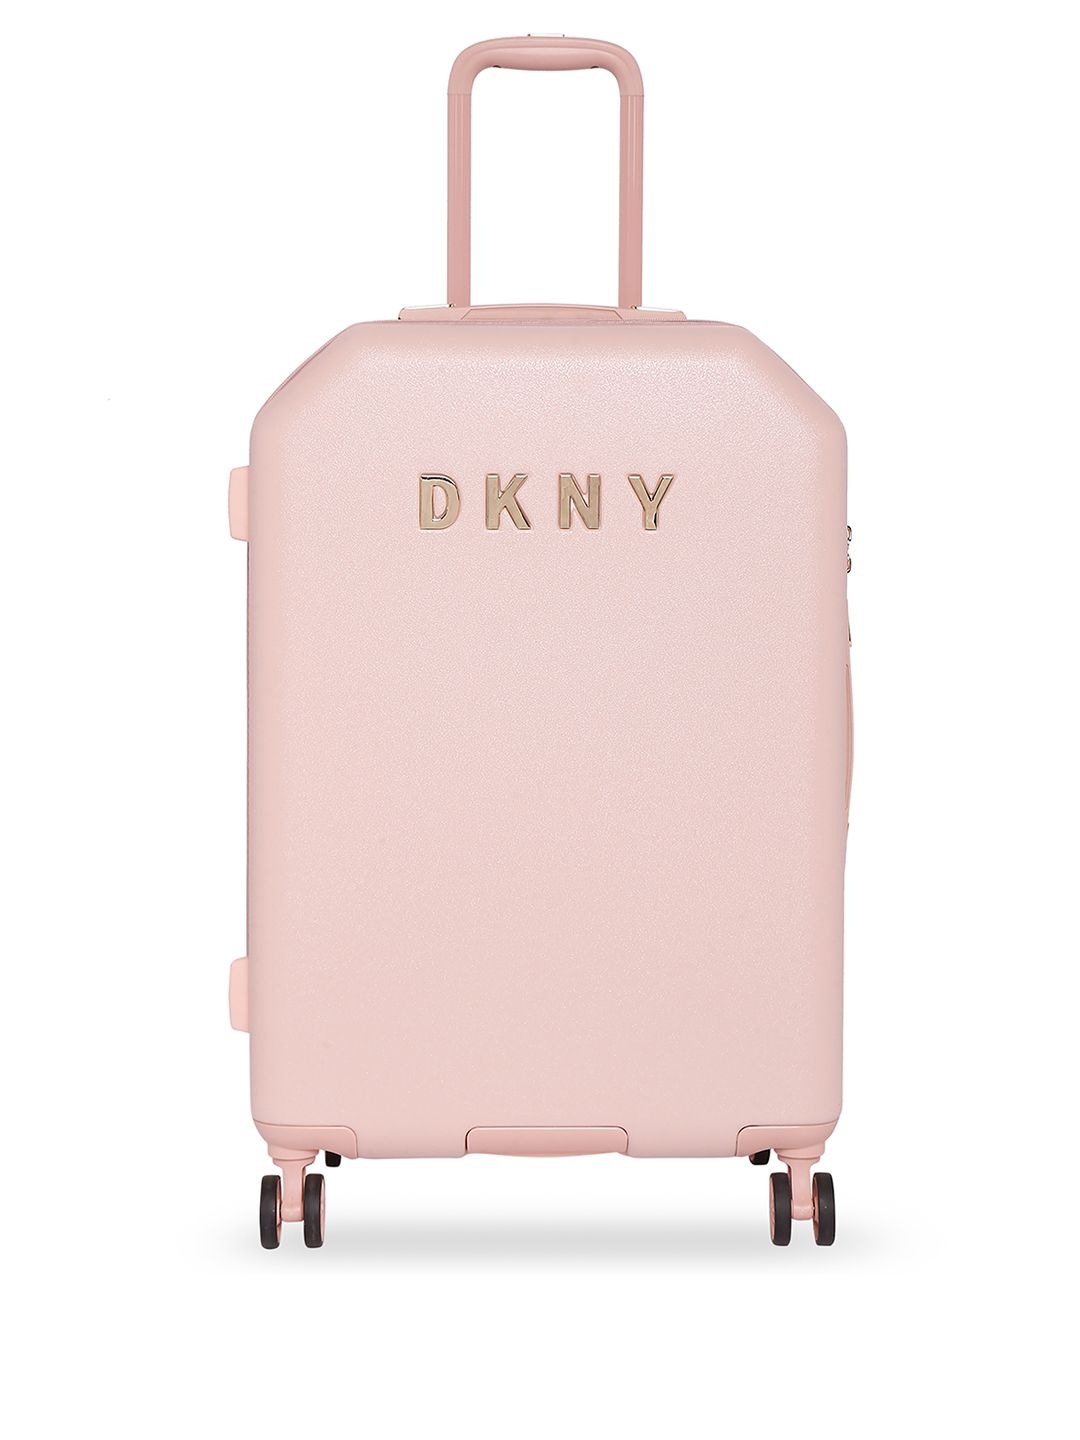 DKNY ALLORE Pink Textured Allore Hard-Sided Medium Trolley Suitcase Price in India